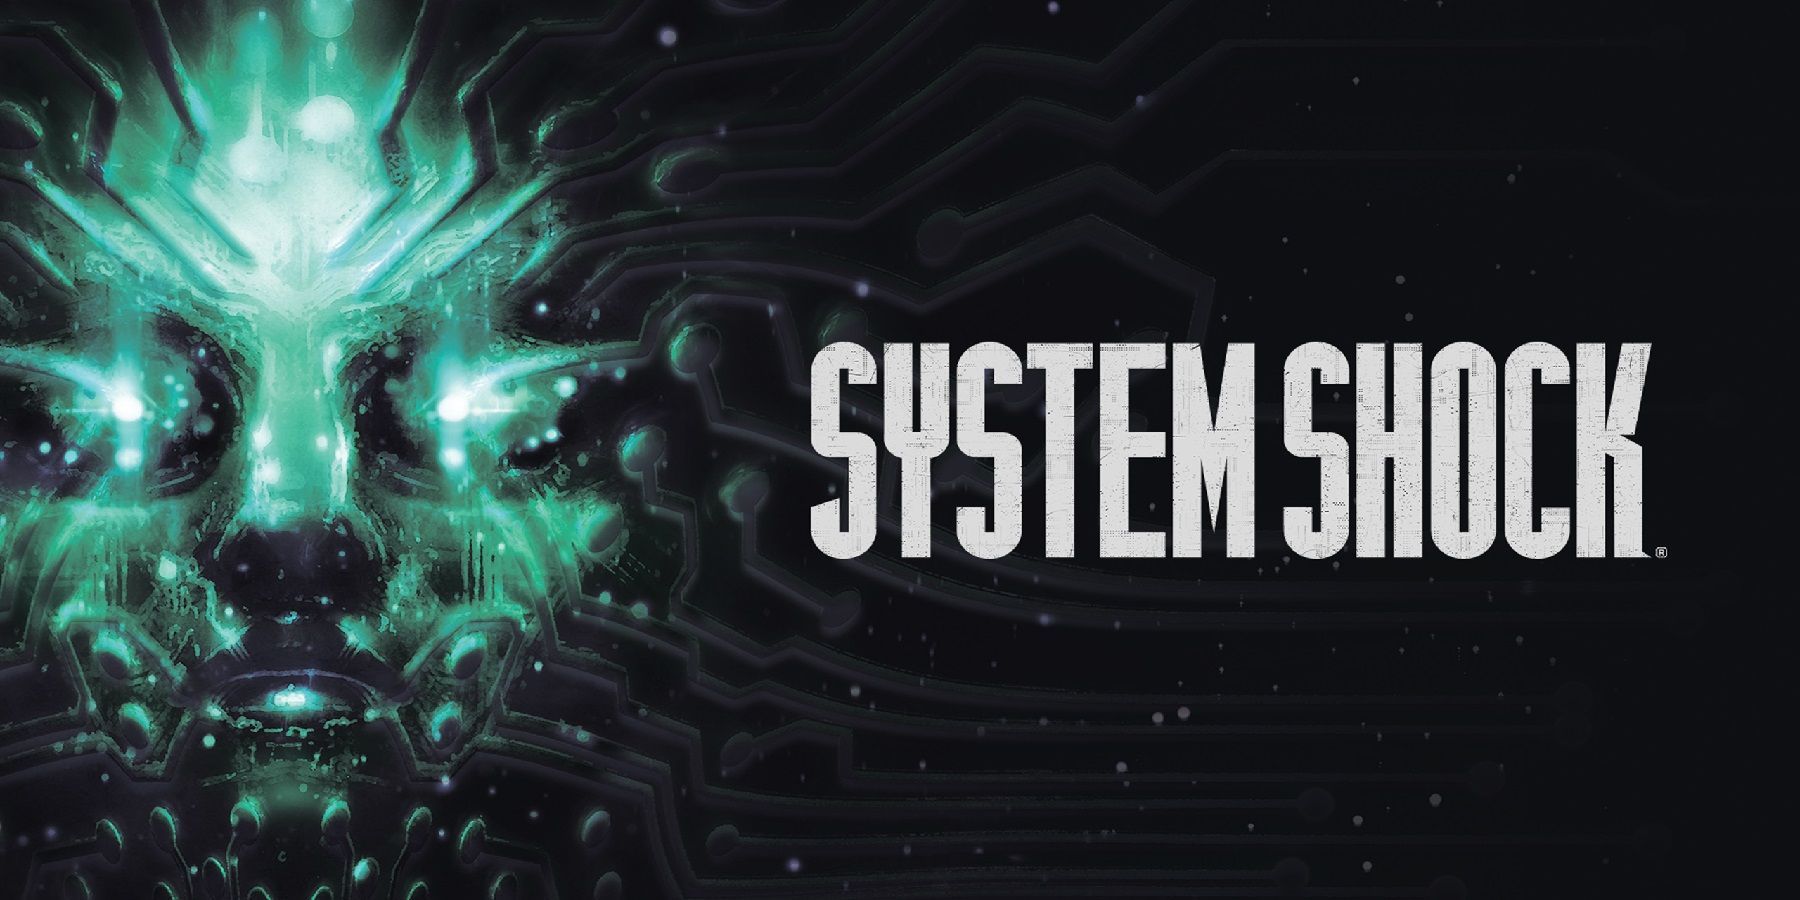 System Shock Remake delayed again, console versions coming even later than expected